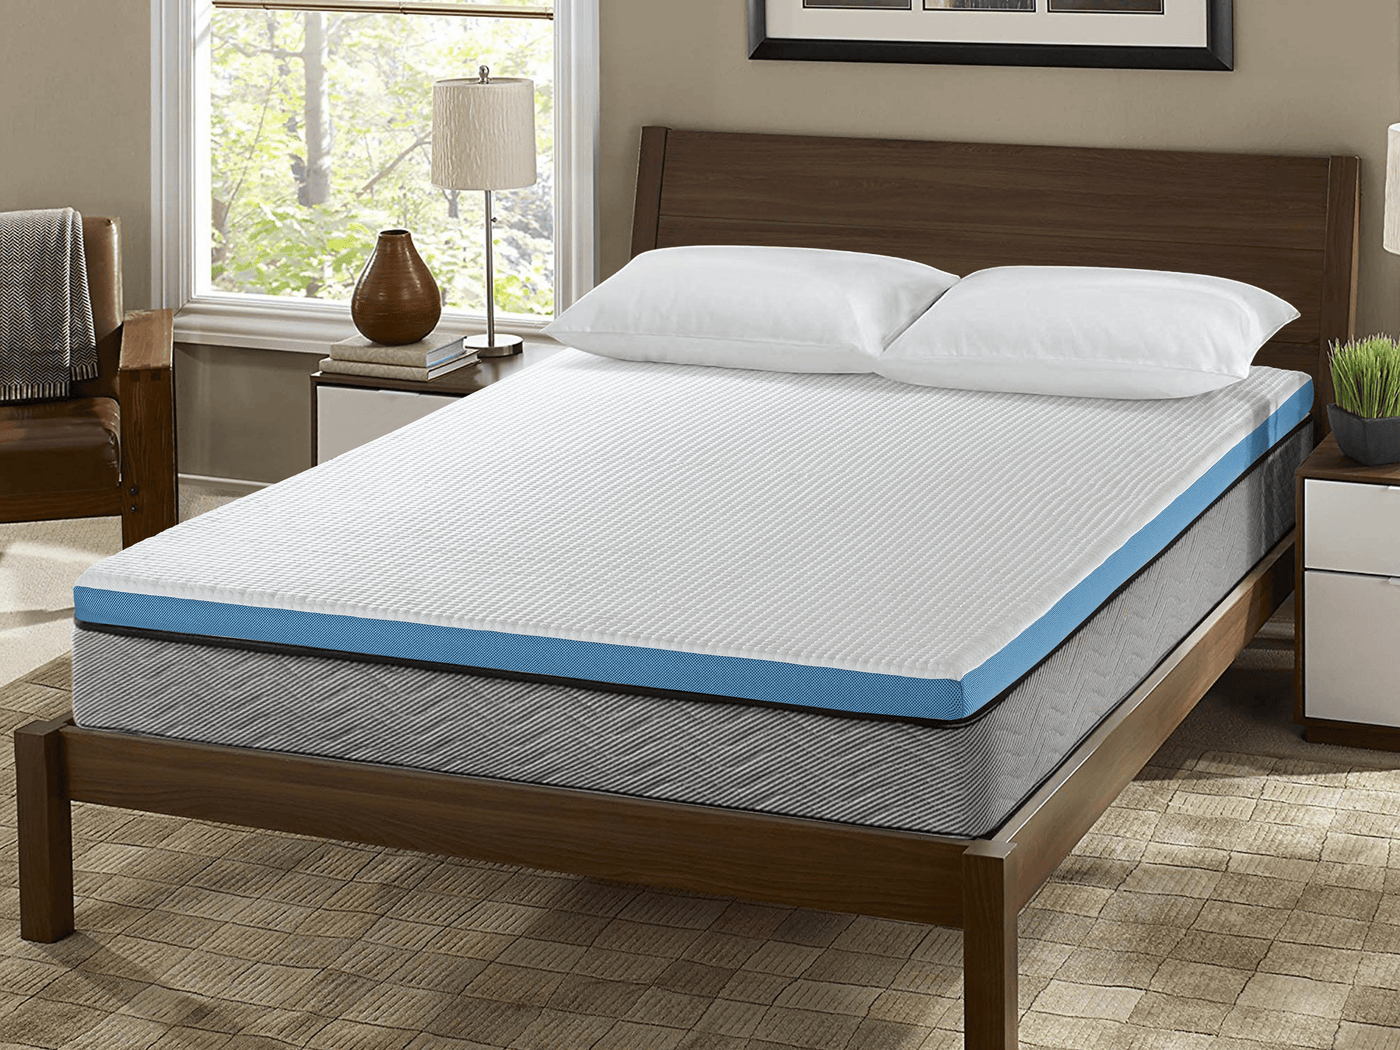  Protection Mattress Topper for Turning - Mattress